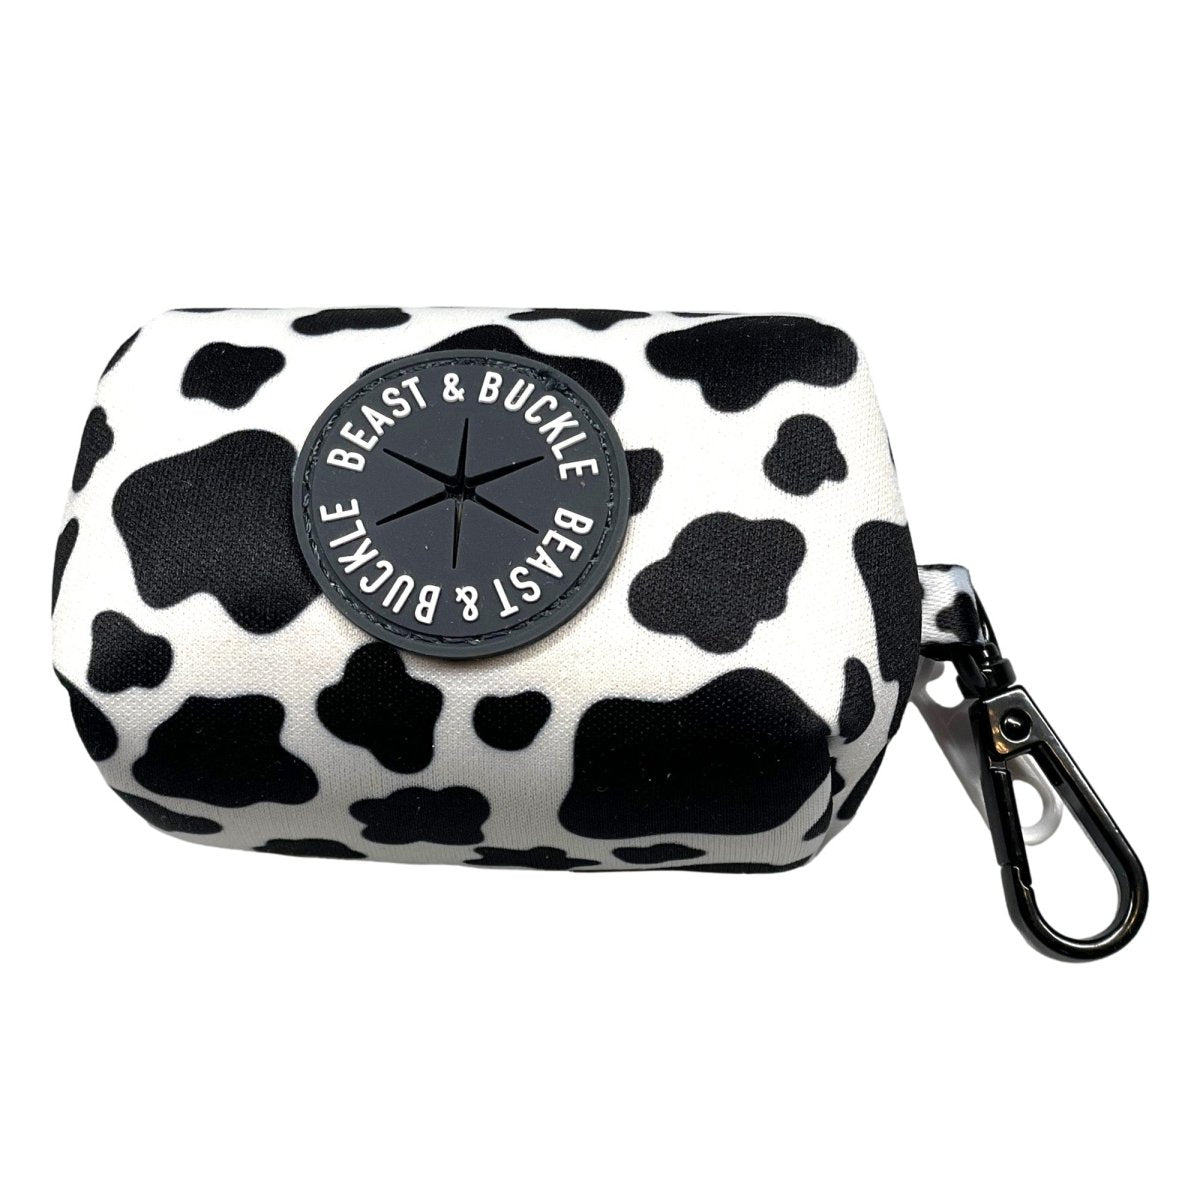 By Scout - Premium vegan Pooch Pouches aka Poo Bag holders